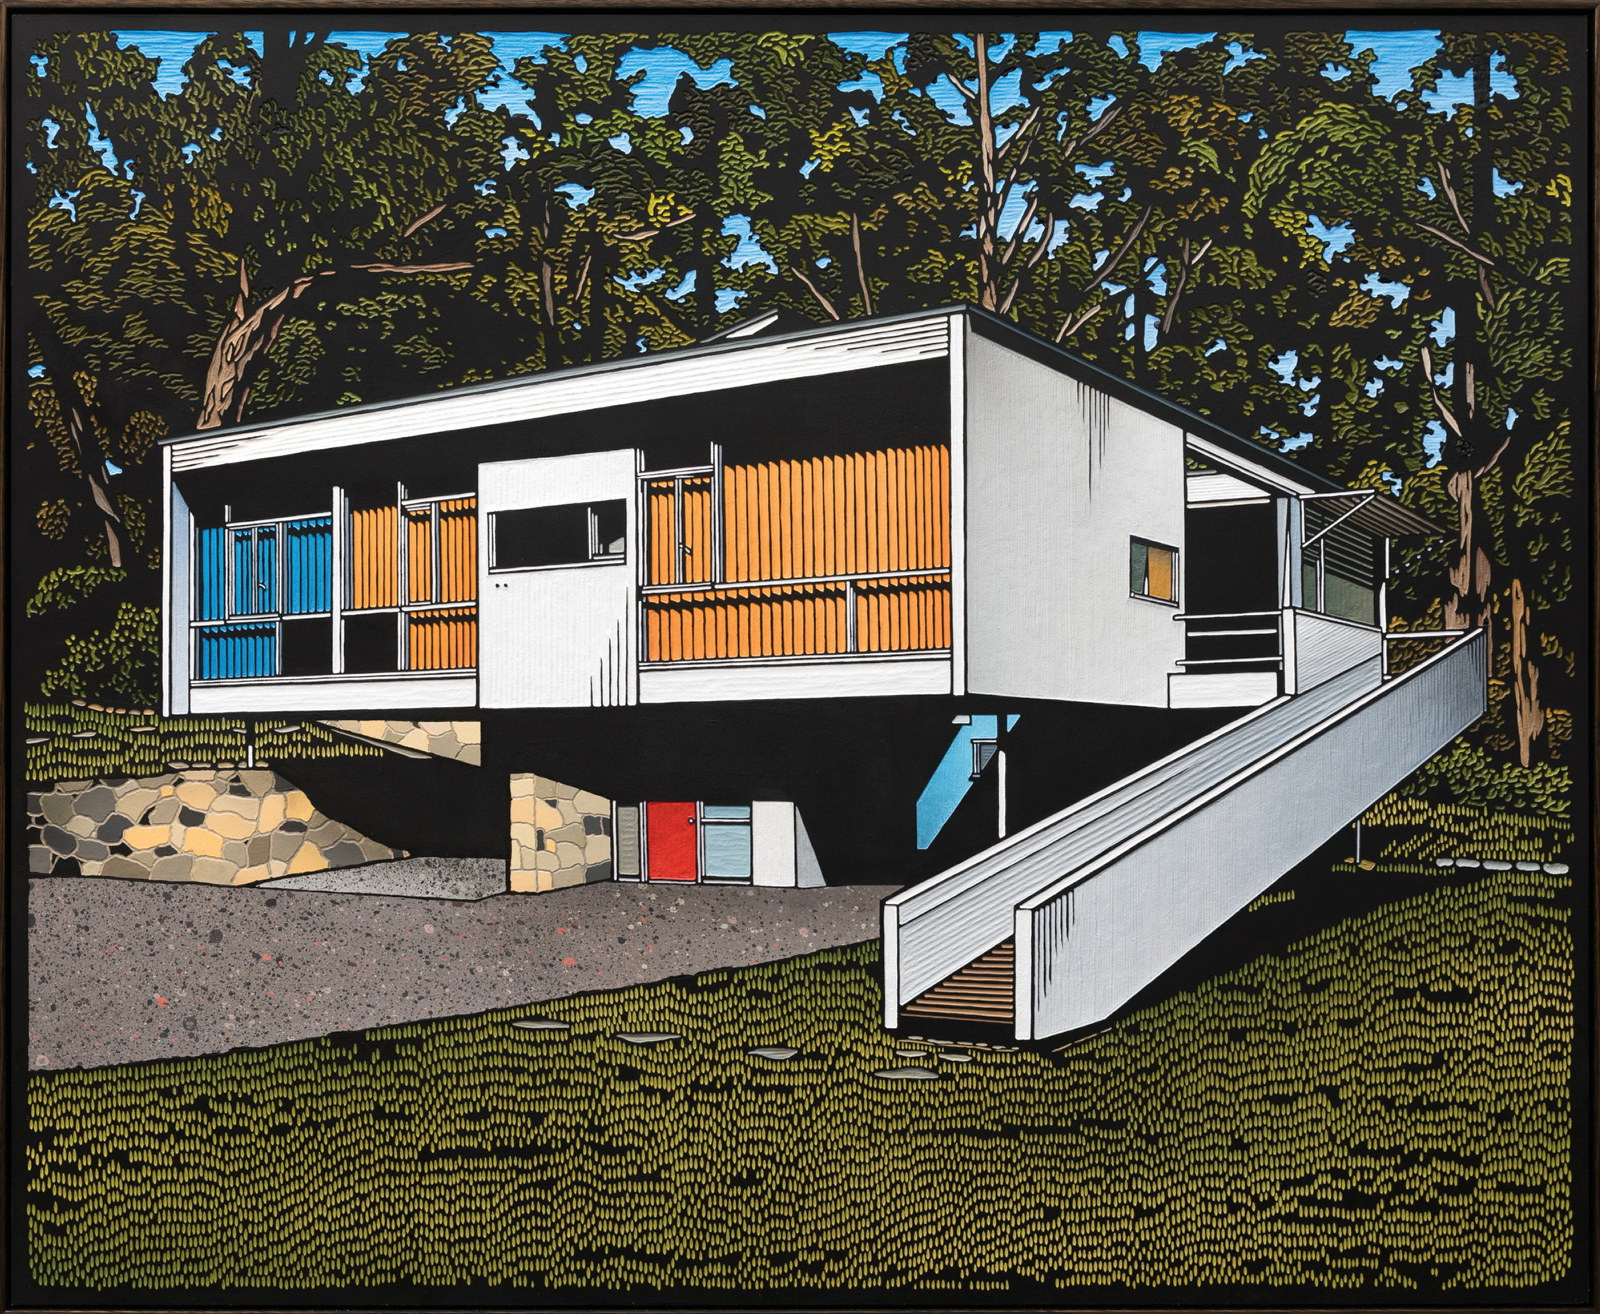 Painting of rectangular modernist house with white ramp on righthand side in bushland setting.